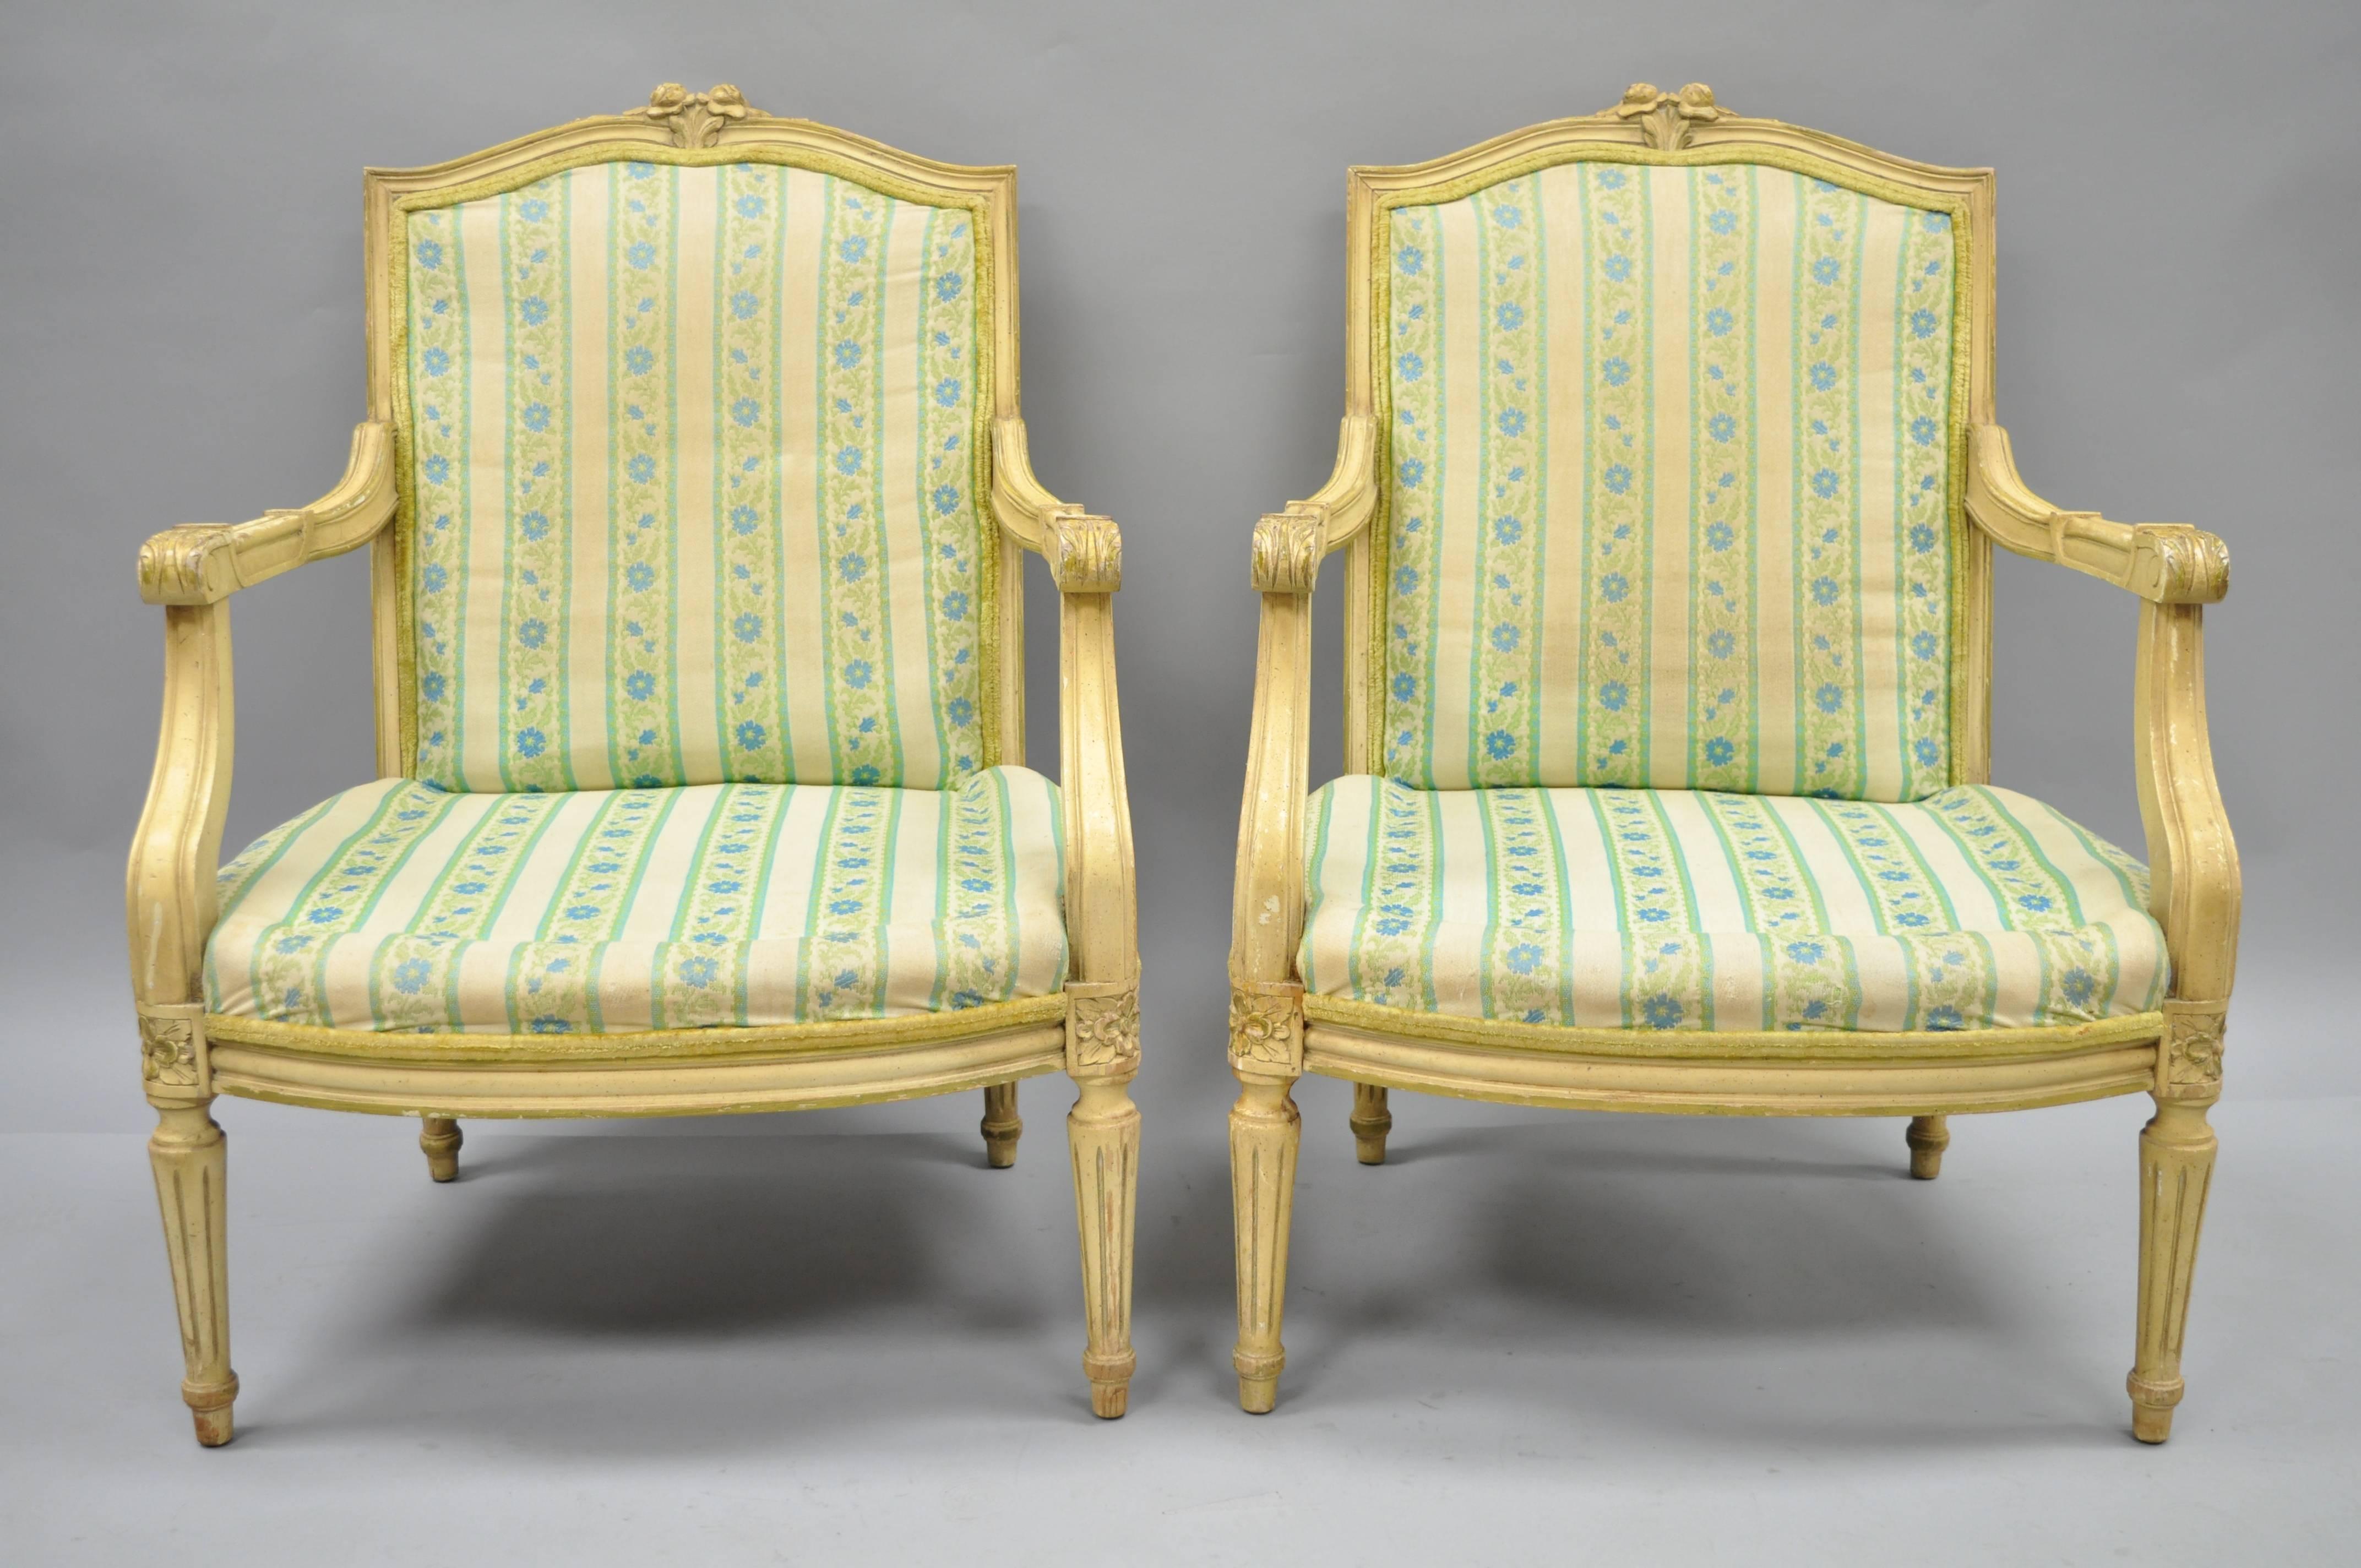 Pair of vintage French Louis XVI Provincial style cream painted armchairs. Item features solid wood construction, cream distress painted finish, nicely carved details, tapered legs, great style and form, circa mid-20th century. Measurements: 35.5